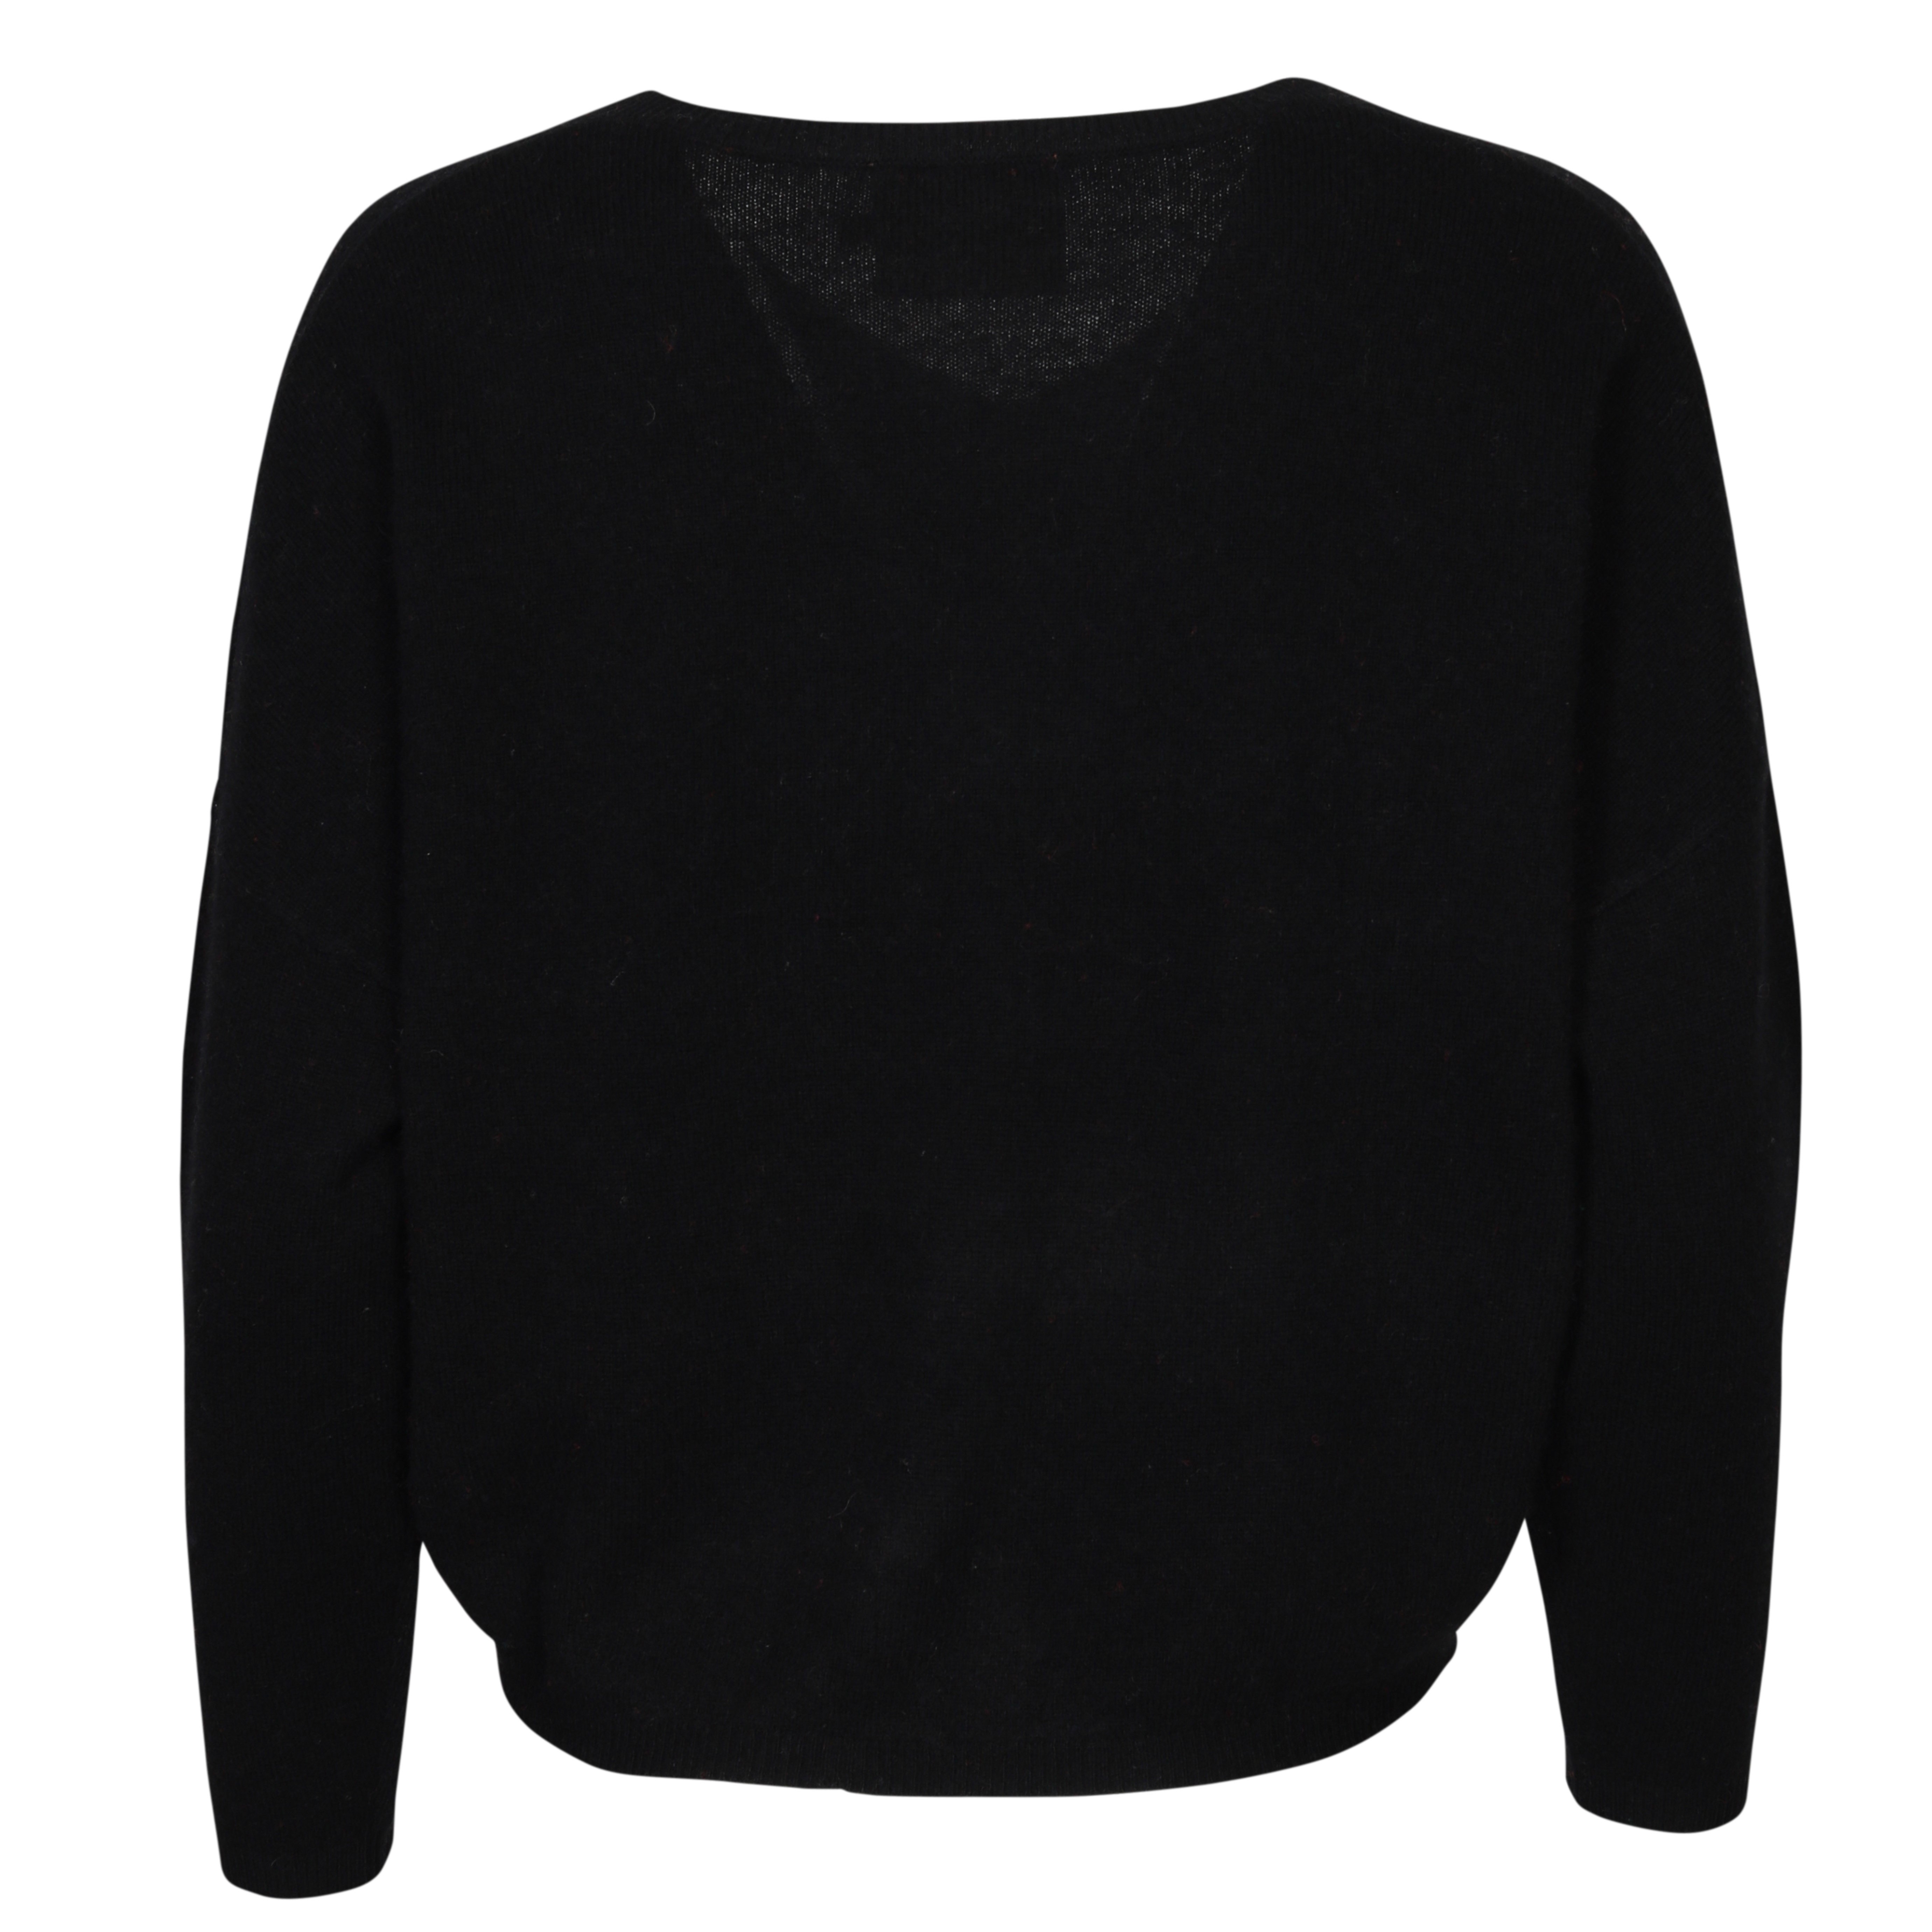 Absolut Cashmere Alicia Pullover in Noir L